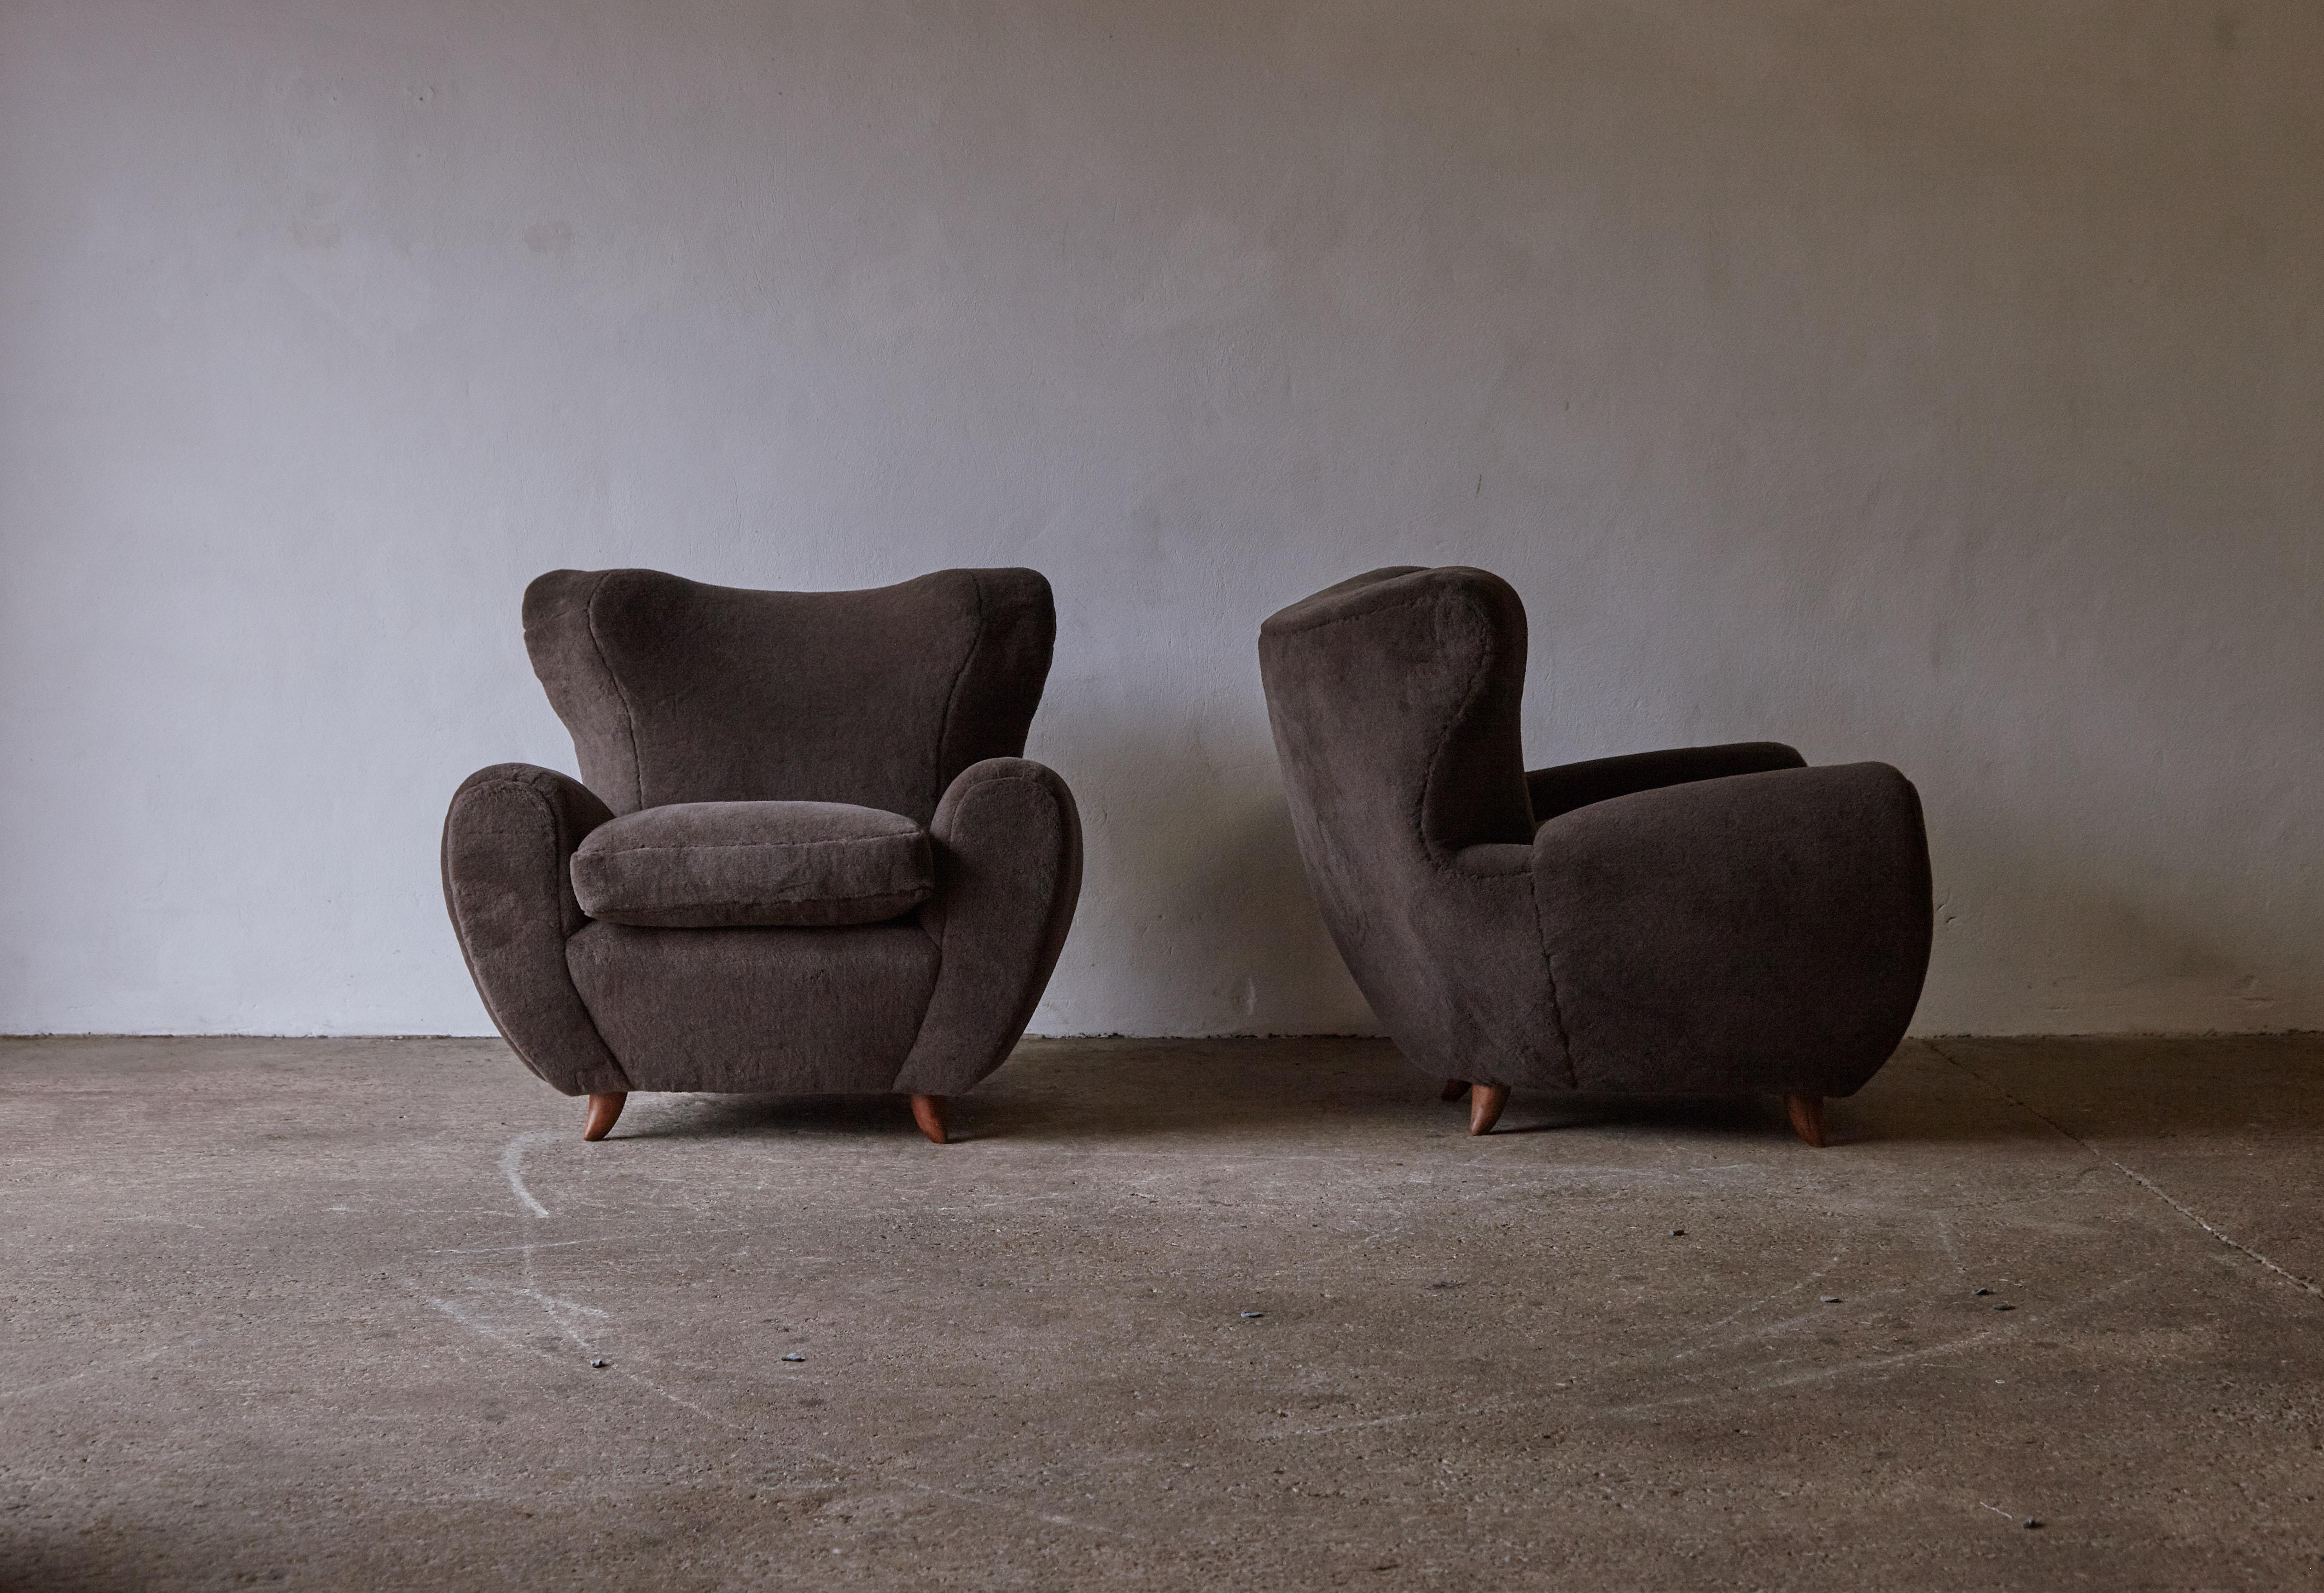 Rare, exceptional pair of 1950s Italian lounge chairs, attributed to Guglielmo Ulrich. Newly upholstered in a premium, brown / grey 100% Alpaca fabric. Very comfortable chairs. Fast shipping worldwide.


